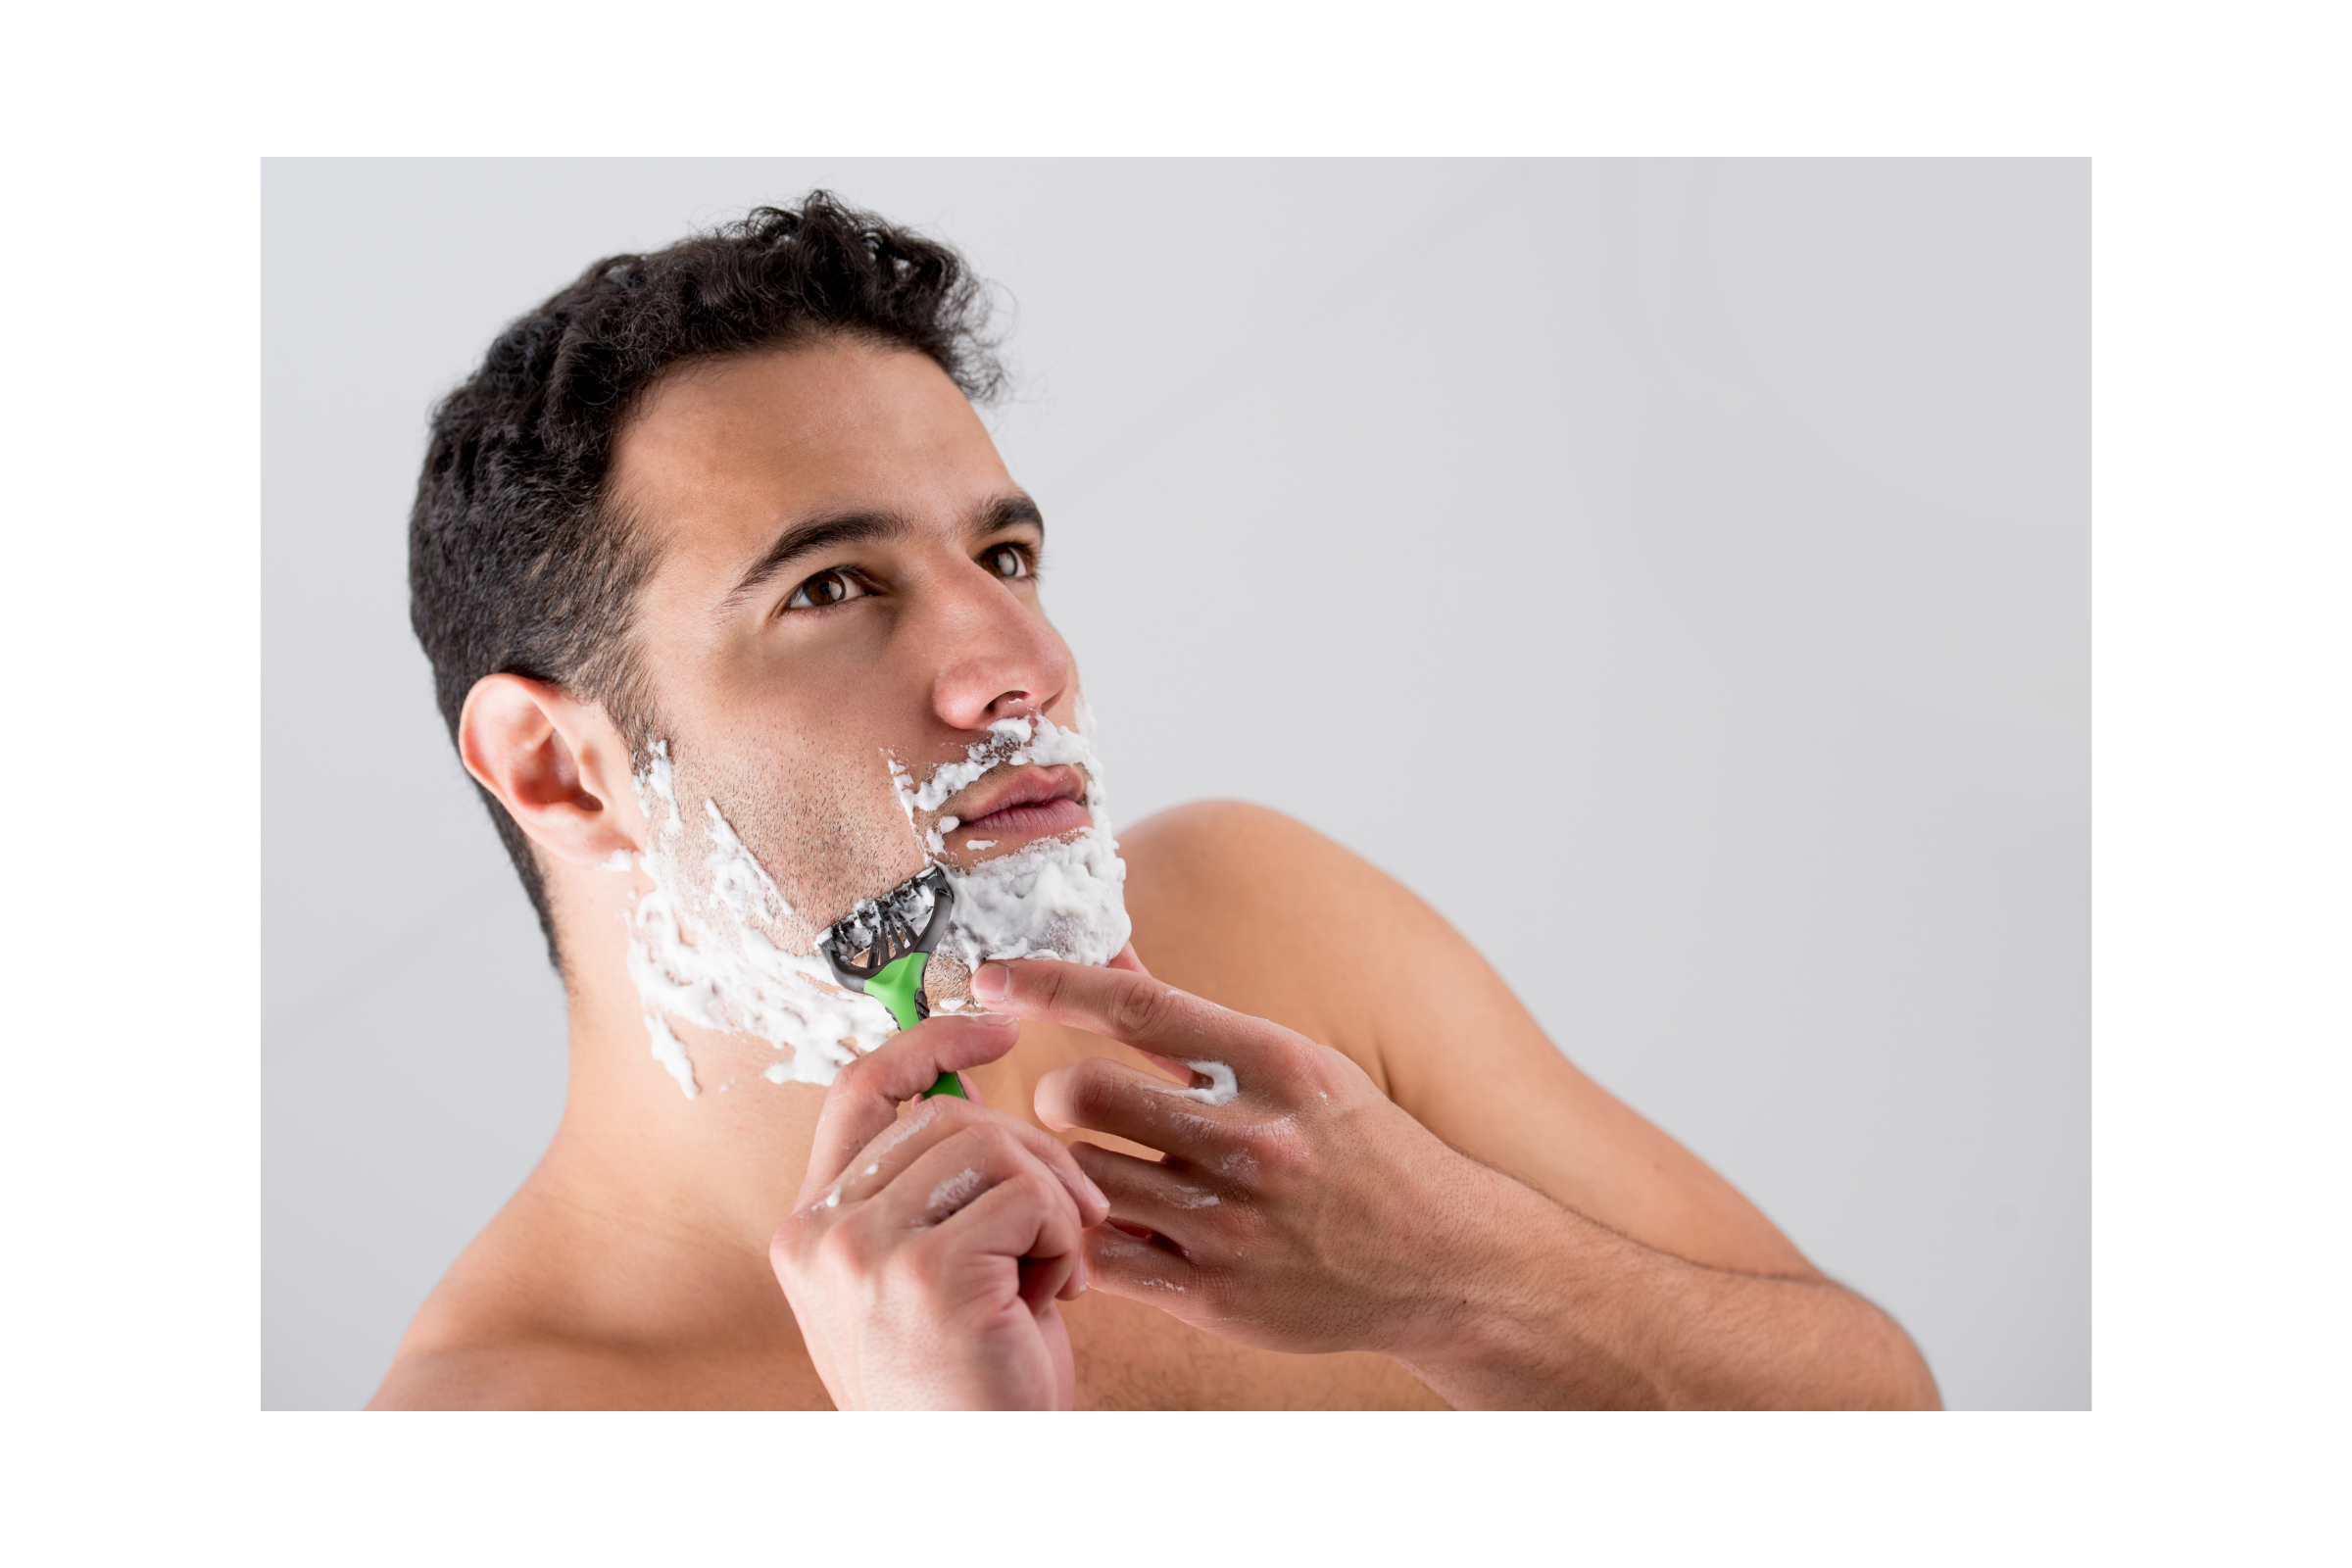 Is shaving painful?